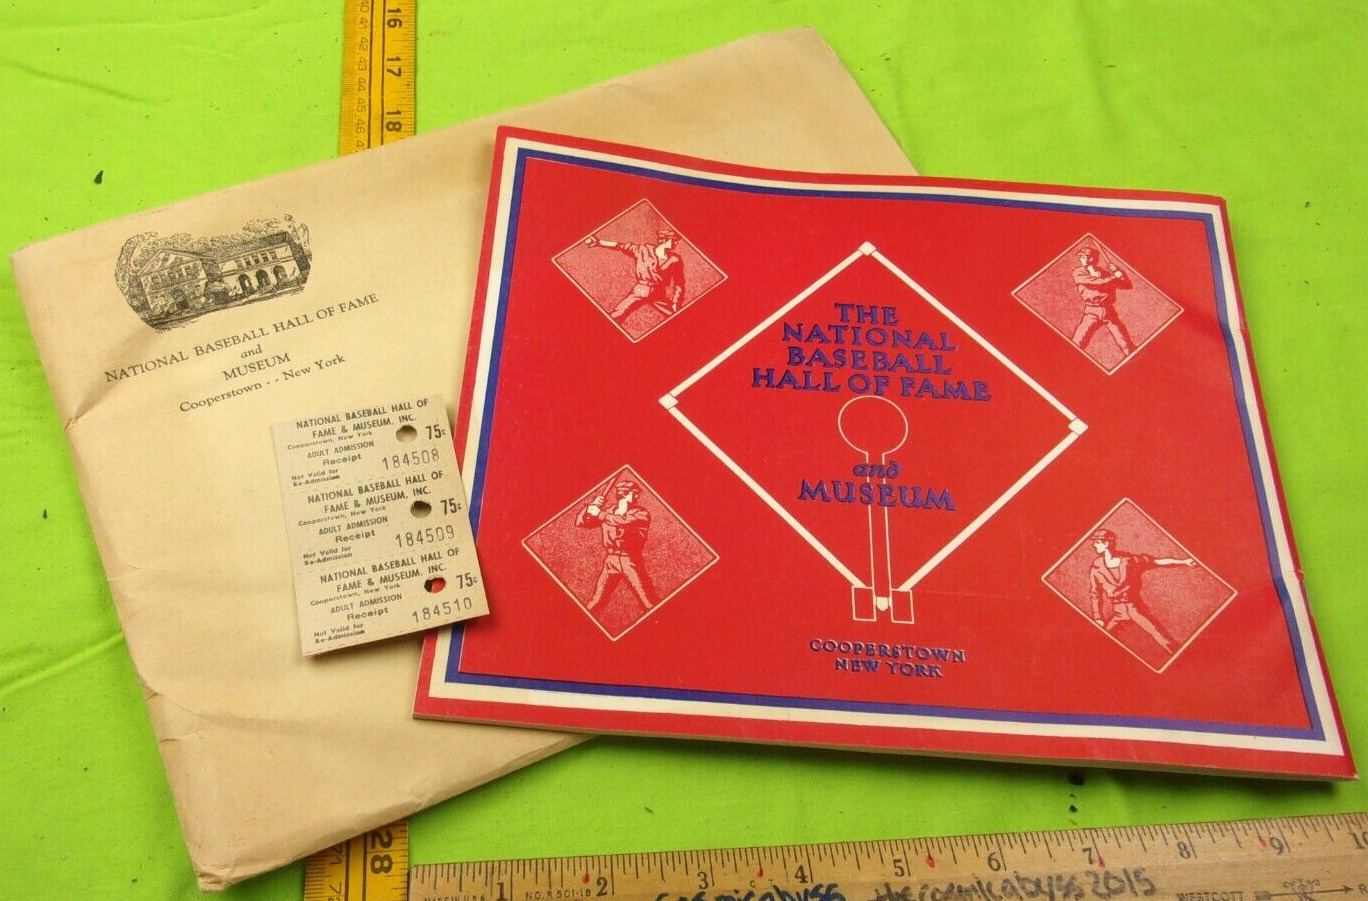 National Baseball Hall of Fame program w/ ticket in envelope 1956 Cooperstown